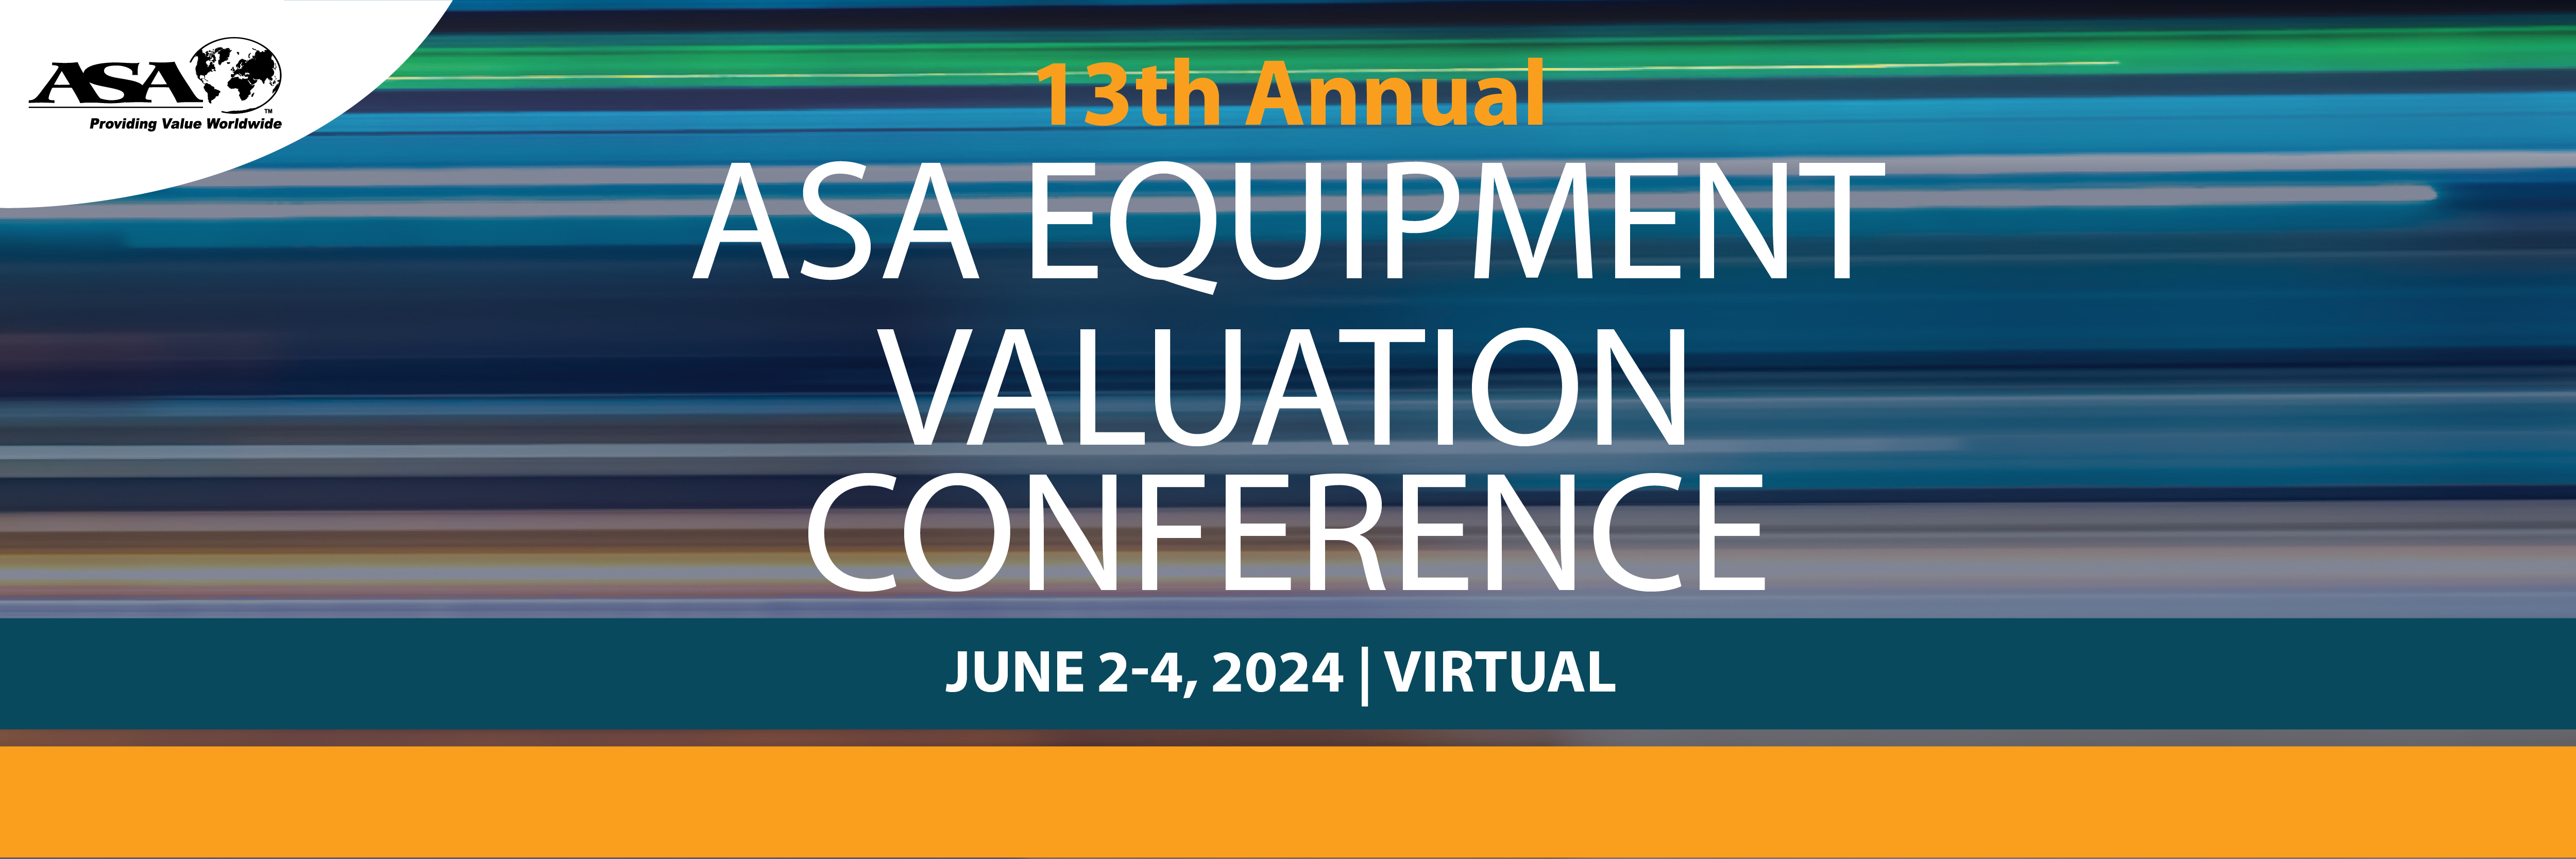 13th Annual ASA Equipment Valuation Conference